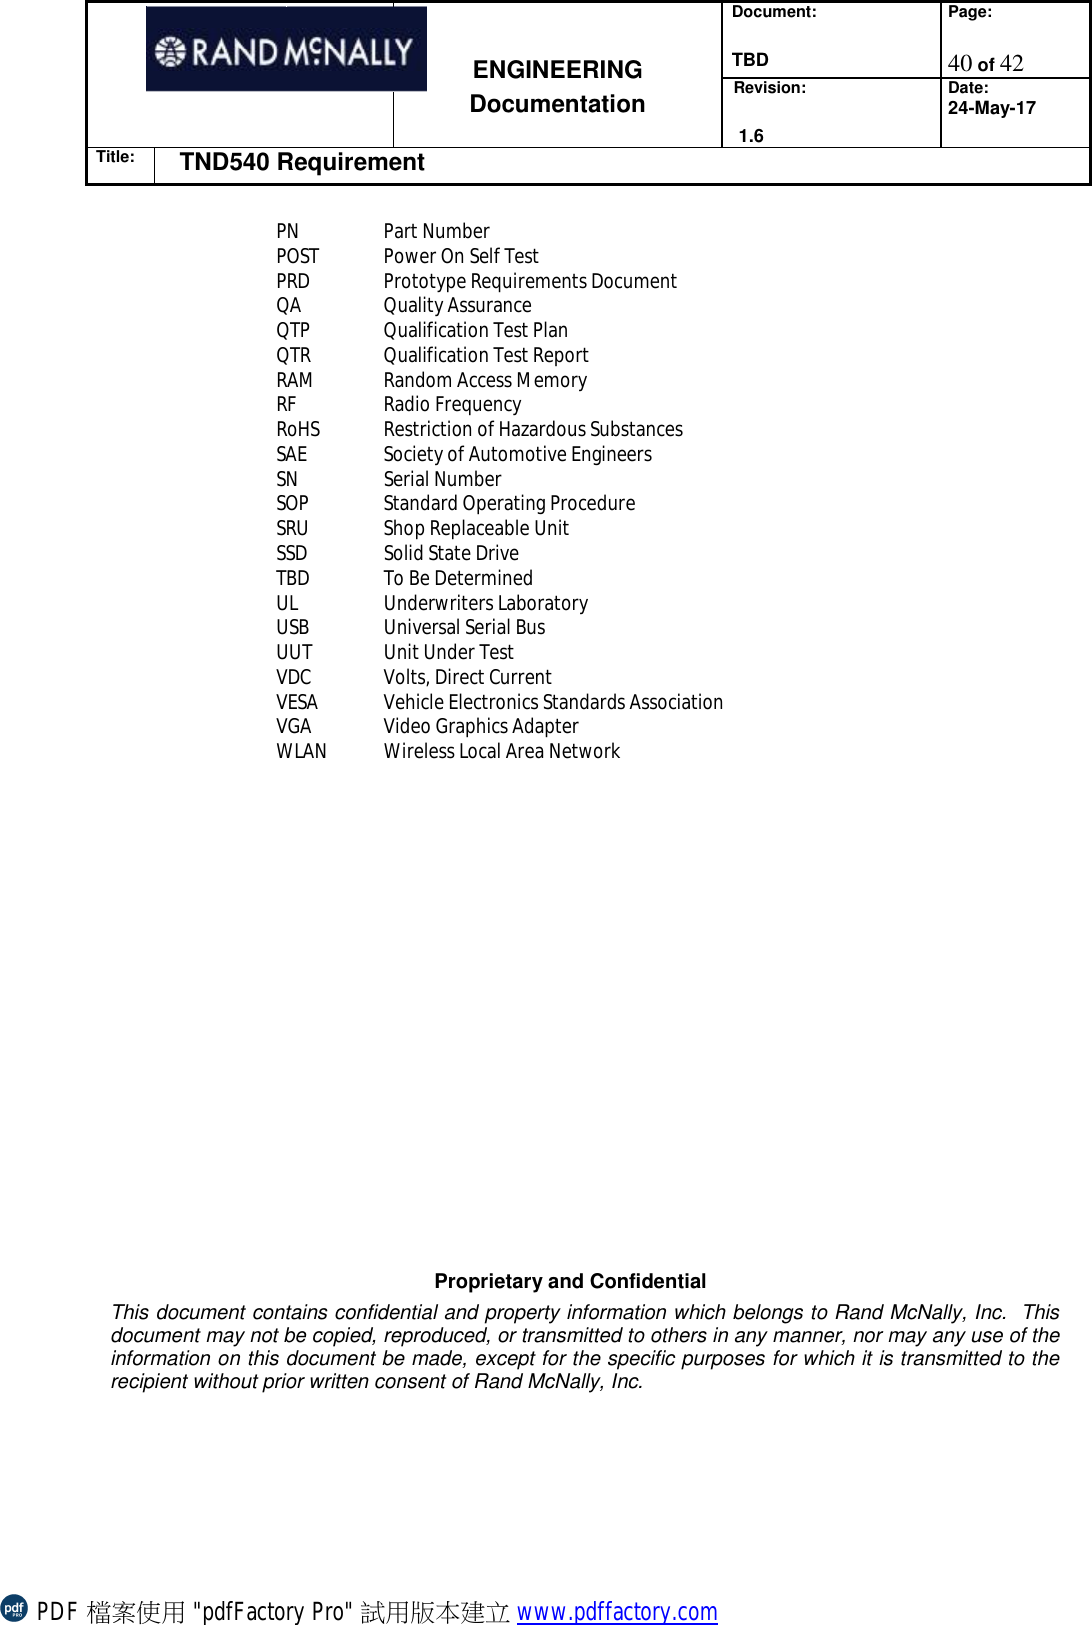 Document:  TBD Page:  40 of 42   ENGINEERING Documentation Revision:   1.6 Date: 24-May-17 Title: TND540 Requirement  Proprietary and Confidential This document contains confidential and property information which belongs to Rand McNally, Inc.  This document may not be copied, reproduced, or transmitted to others in any manner, nor may any use of the information on this document be made, except for the specific purposes for which it is transmitted to the recipient without prior written consent of Rand McNally, Inc.   PN Part Number POST Power On Self Test PRD Prototype Requirements Document QA Quality Assurance QTP Qualification Test Plan QTR Qualification Test Report RAM Random Access Memory RF Radio Frequency RoHS Restriction of Hazardous Substances SAE Society of Automotive Engineers SN Serial Number SOP Standard Operating Procedure SRU Shop Replaceable Unit SSD Solid State Drive TBD To Be Determined UL Underwriters Laboratory USB Universal Serial Bus UUT Unit Under Test VDC Volts, Direct Current VESA Vehicle Electronics Standards Association VGA Video Graphics Adapter WLAN Wireless Local Area Network  PDF 檔案使用 &quot;pdfFactory Pro&quot; 試用版本建立 www.pdffactory.com